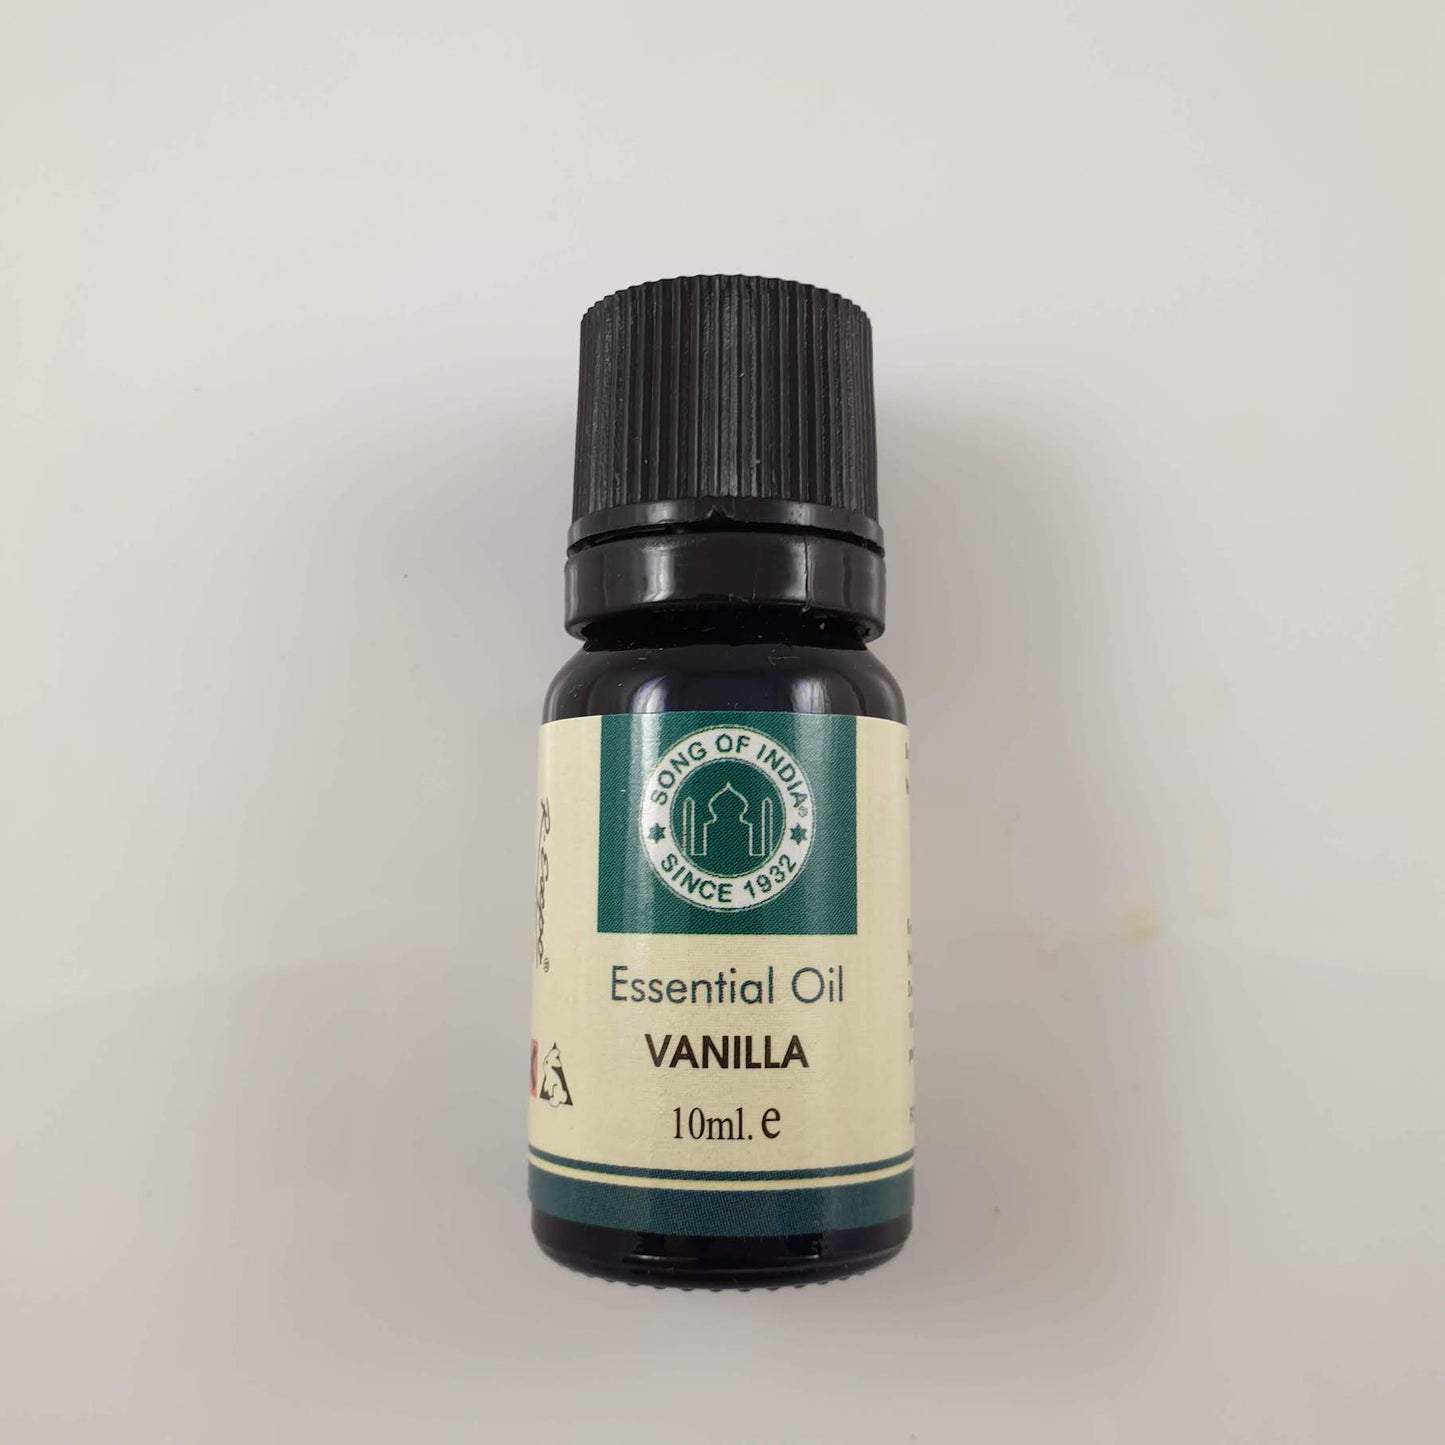 Song of India Essential Oil - Vanilla 10ml - Rivendell Shop